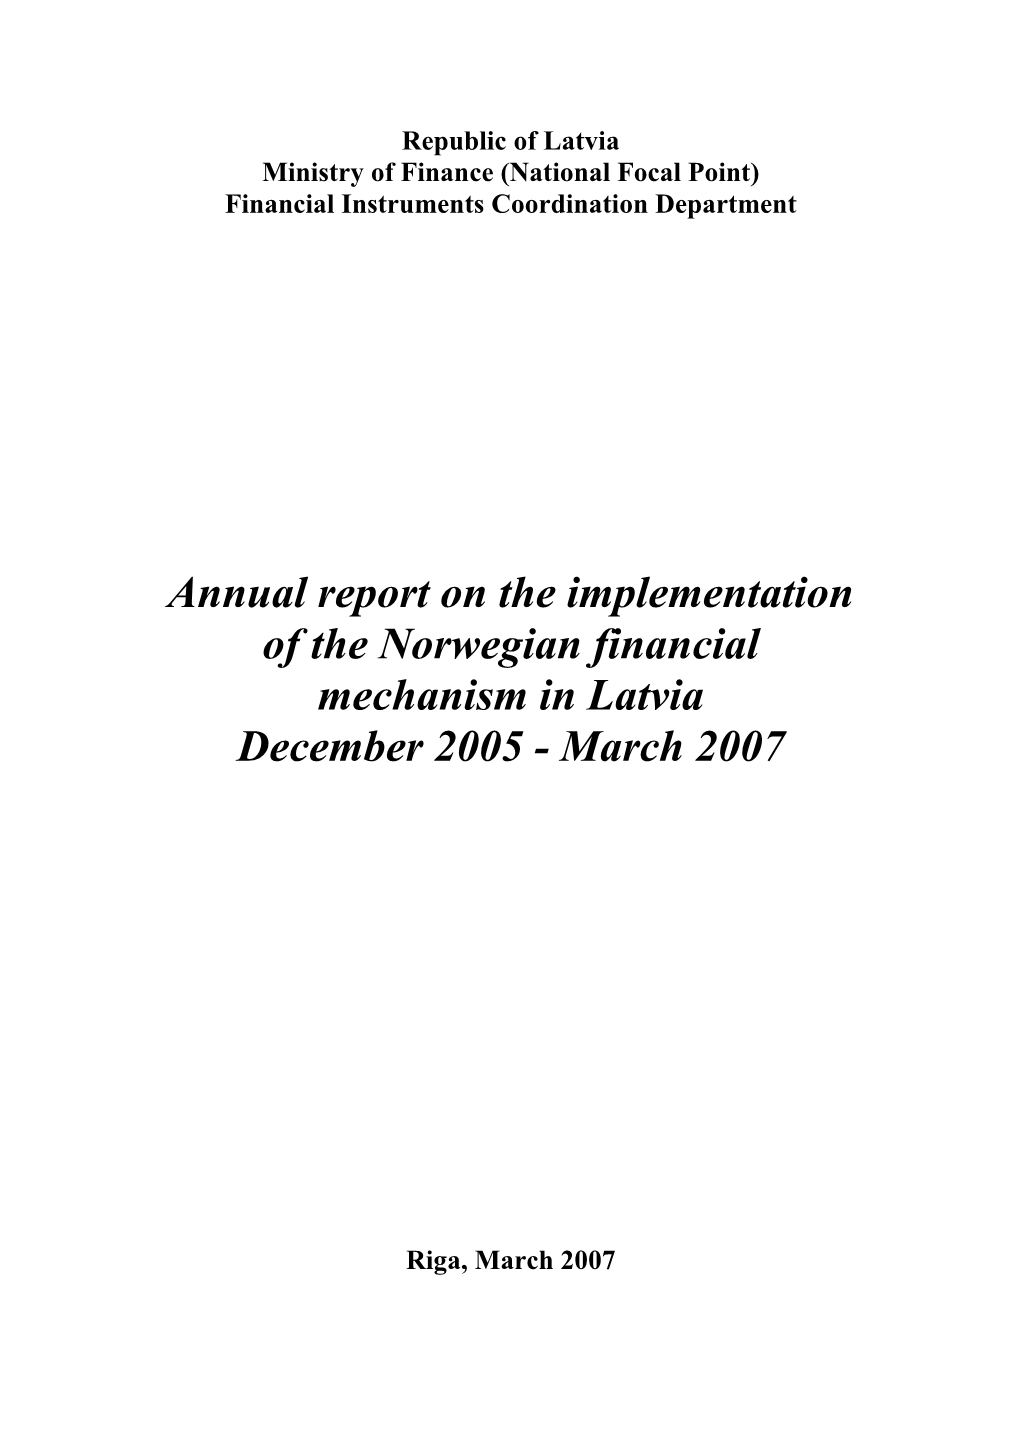 Annual Report on the Implementation of the Norwegian Financial Mechanism in Latvia December 2005 - March 2007